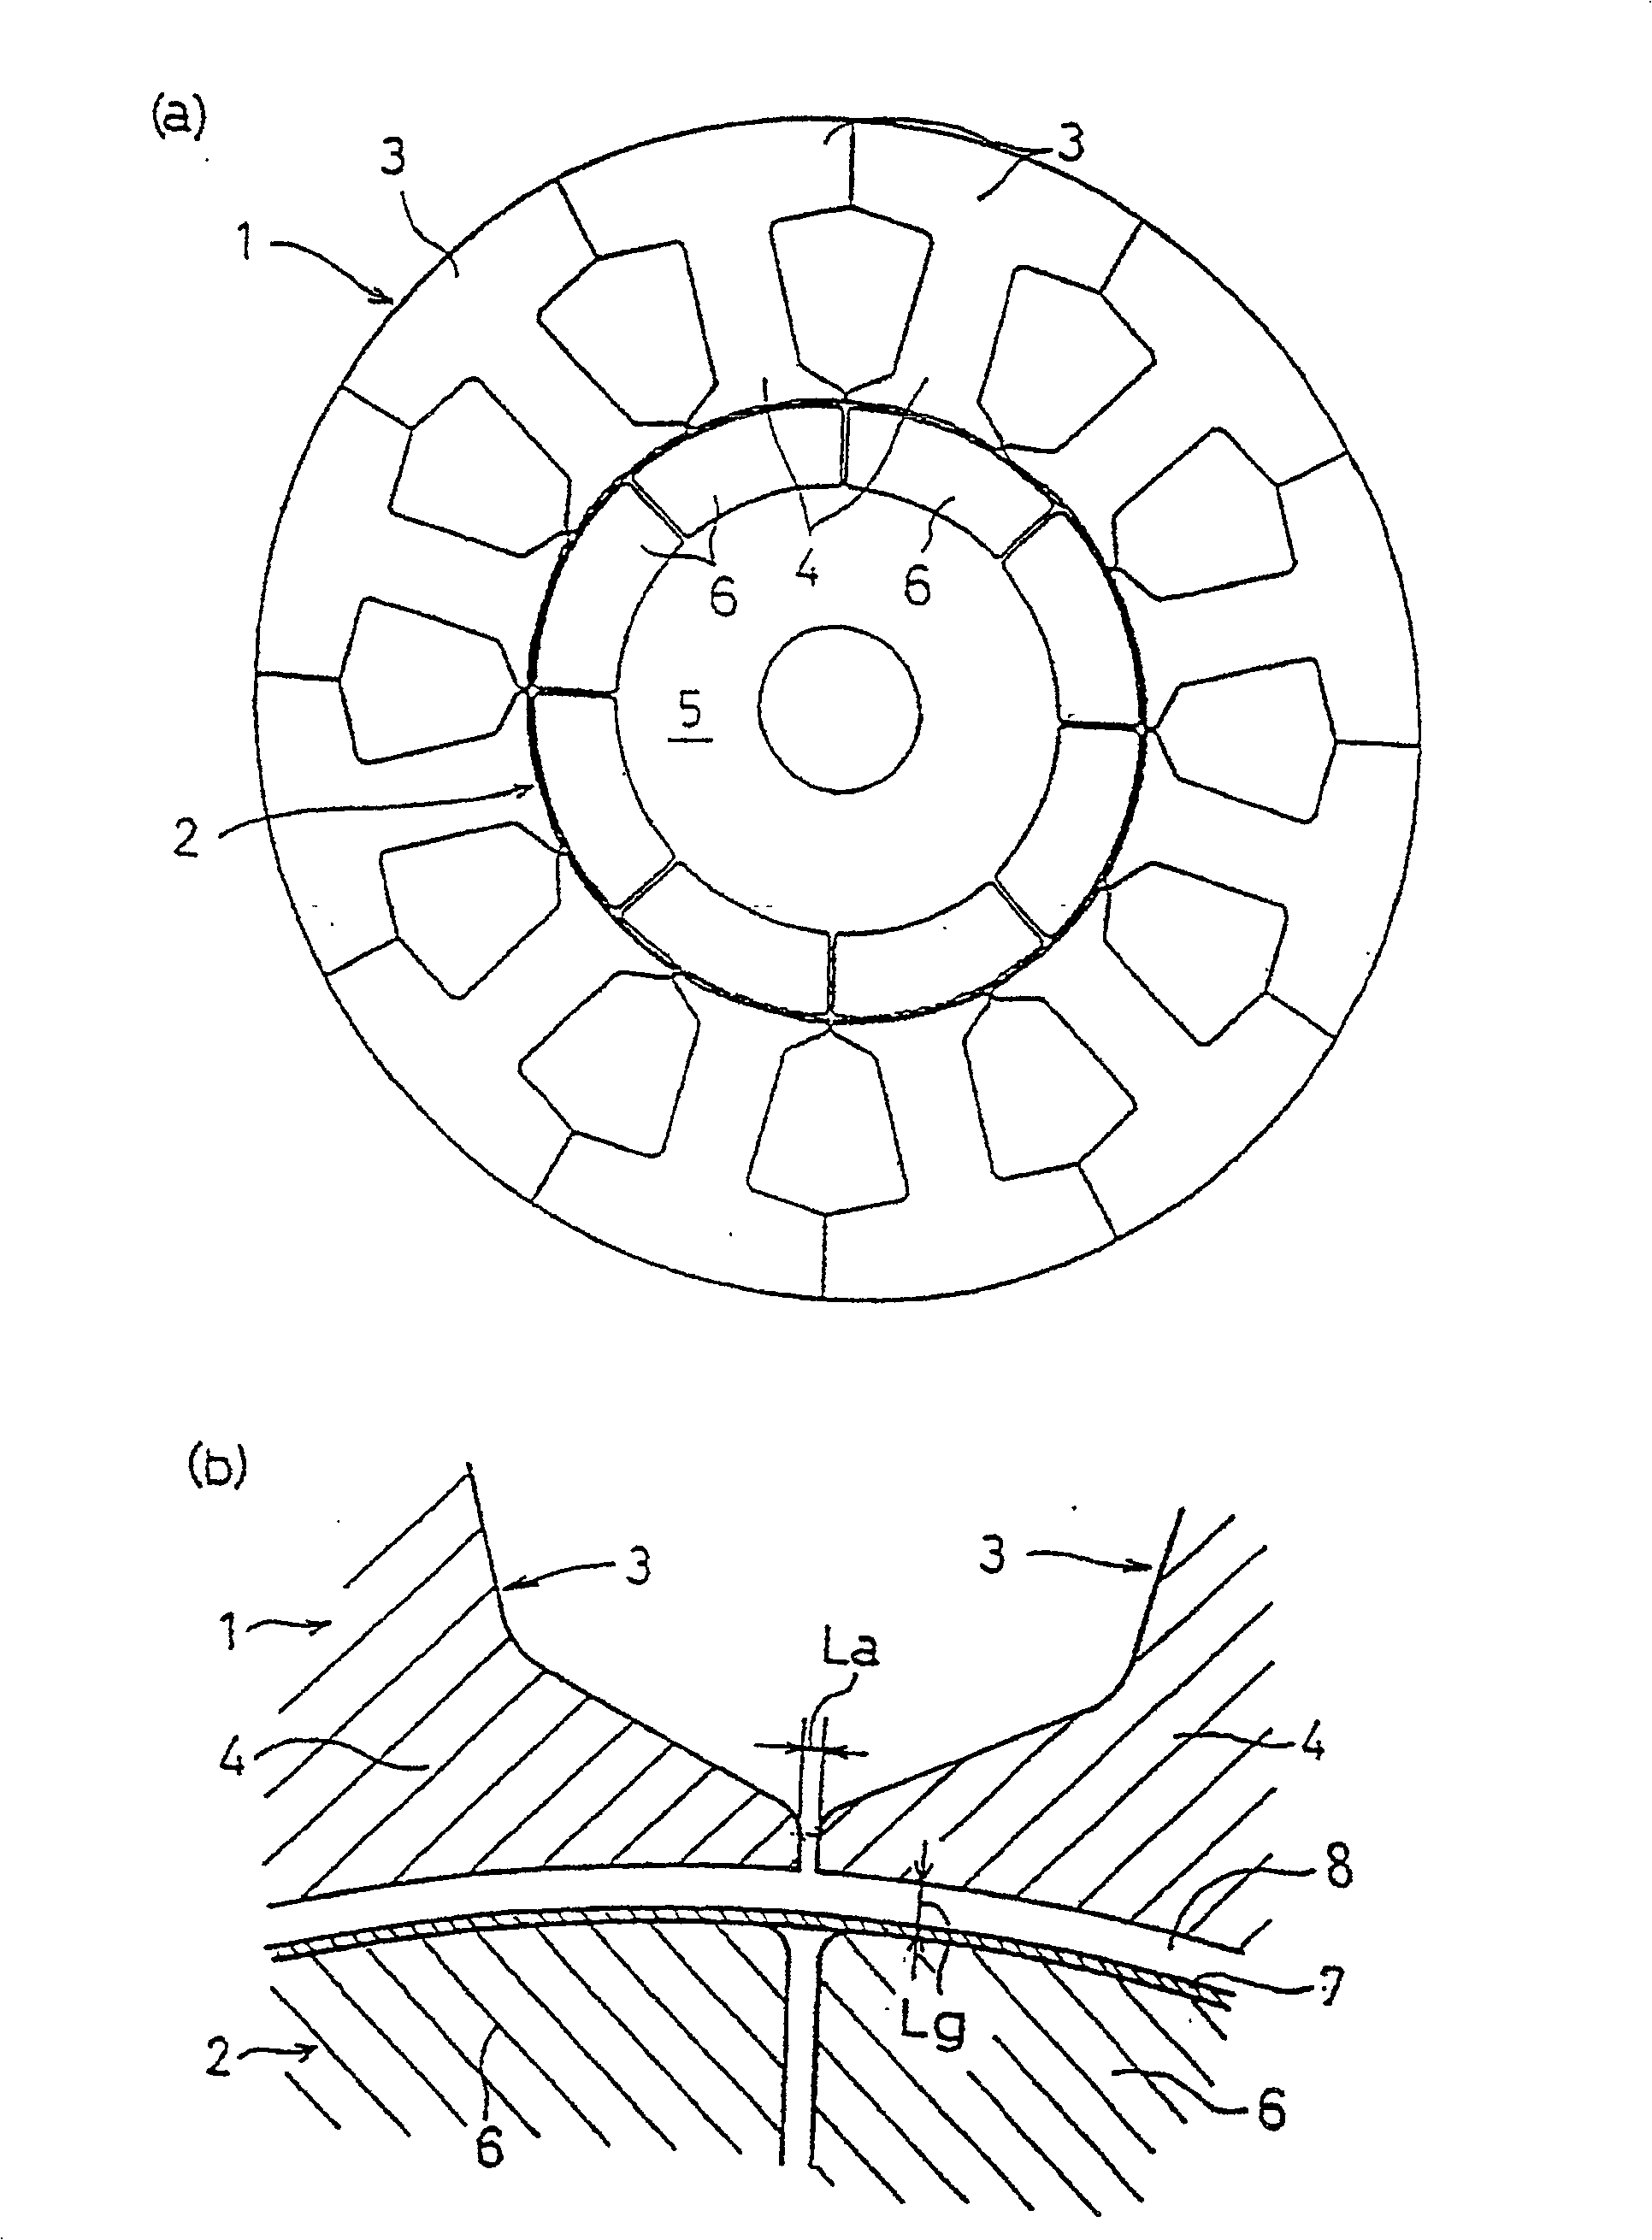 Air conditioner or compressor for refrigerator driven by permanent magnet synchronous motor